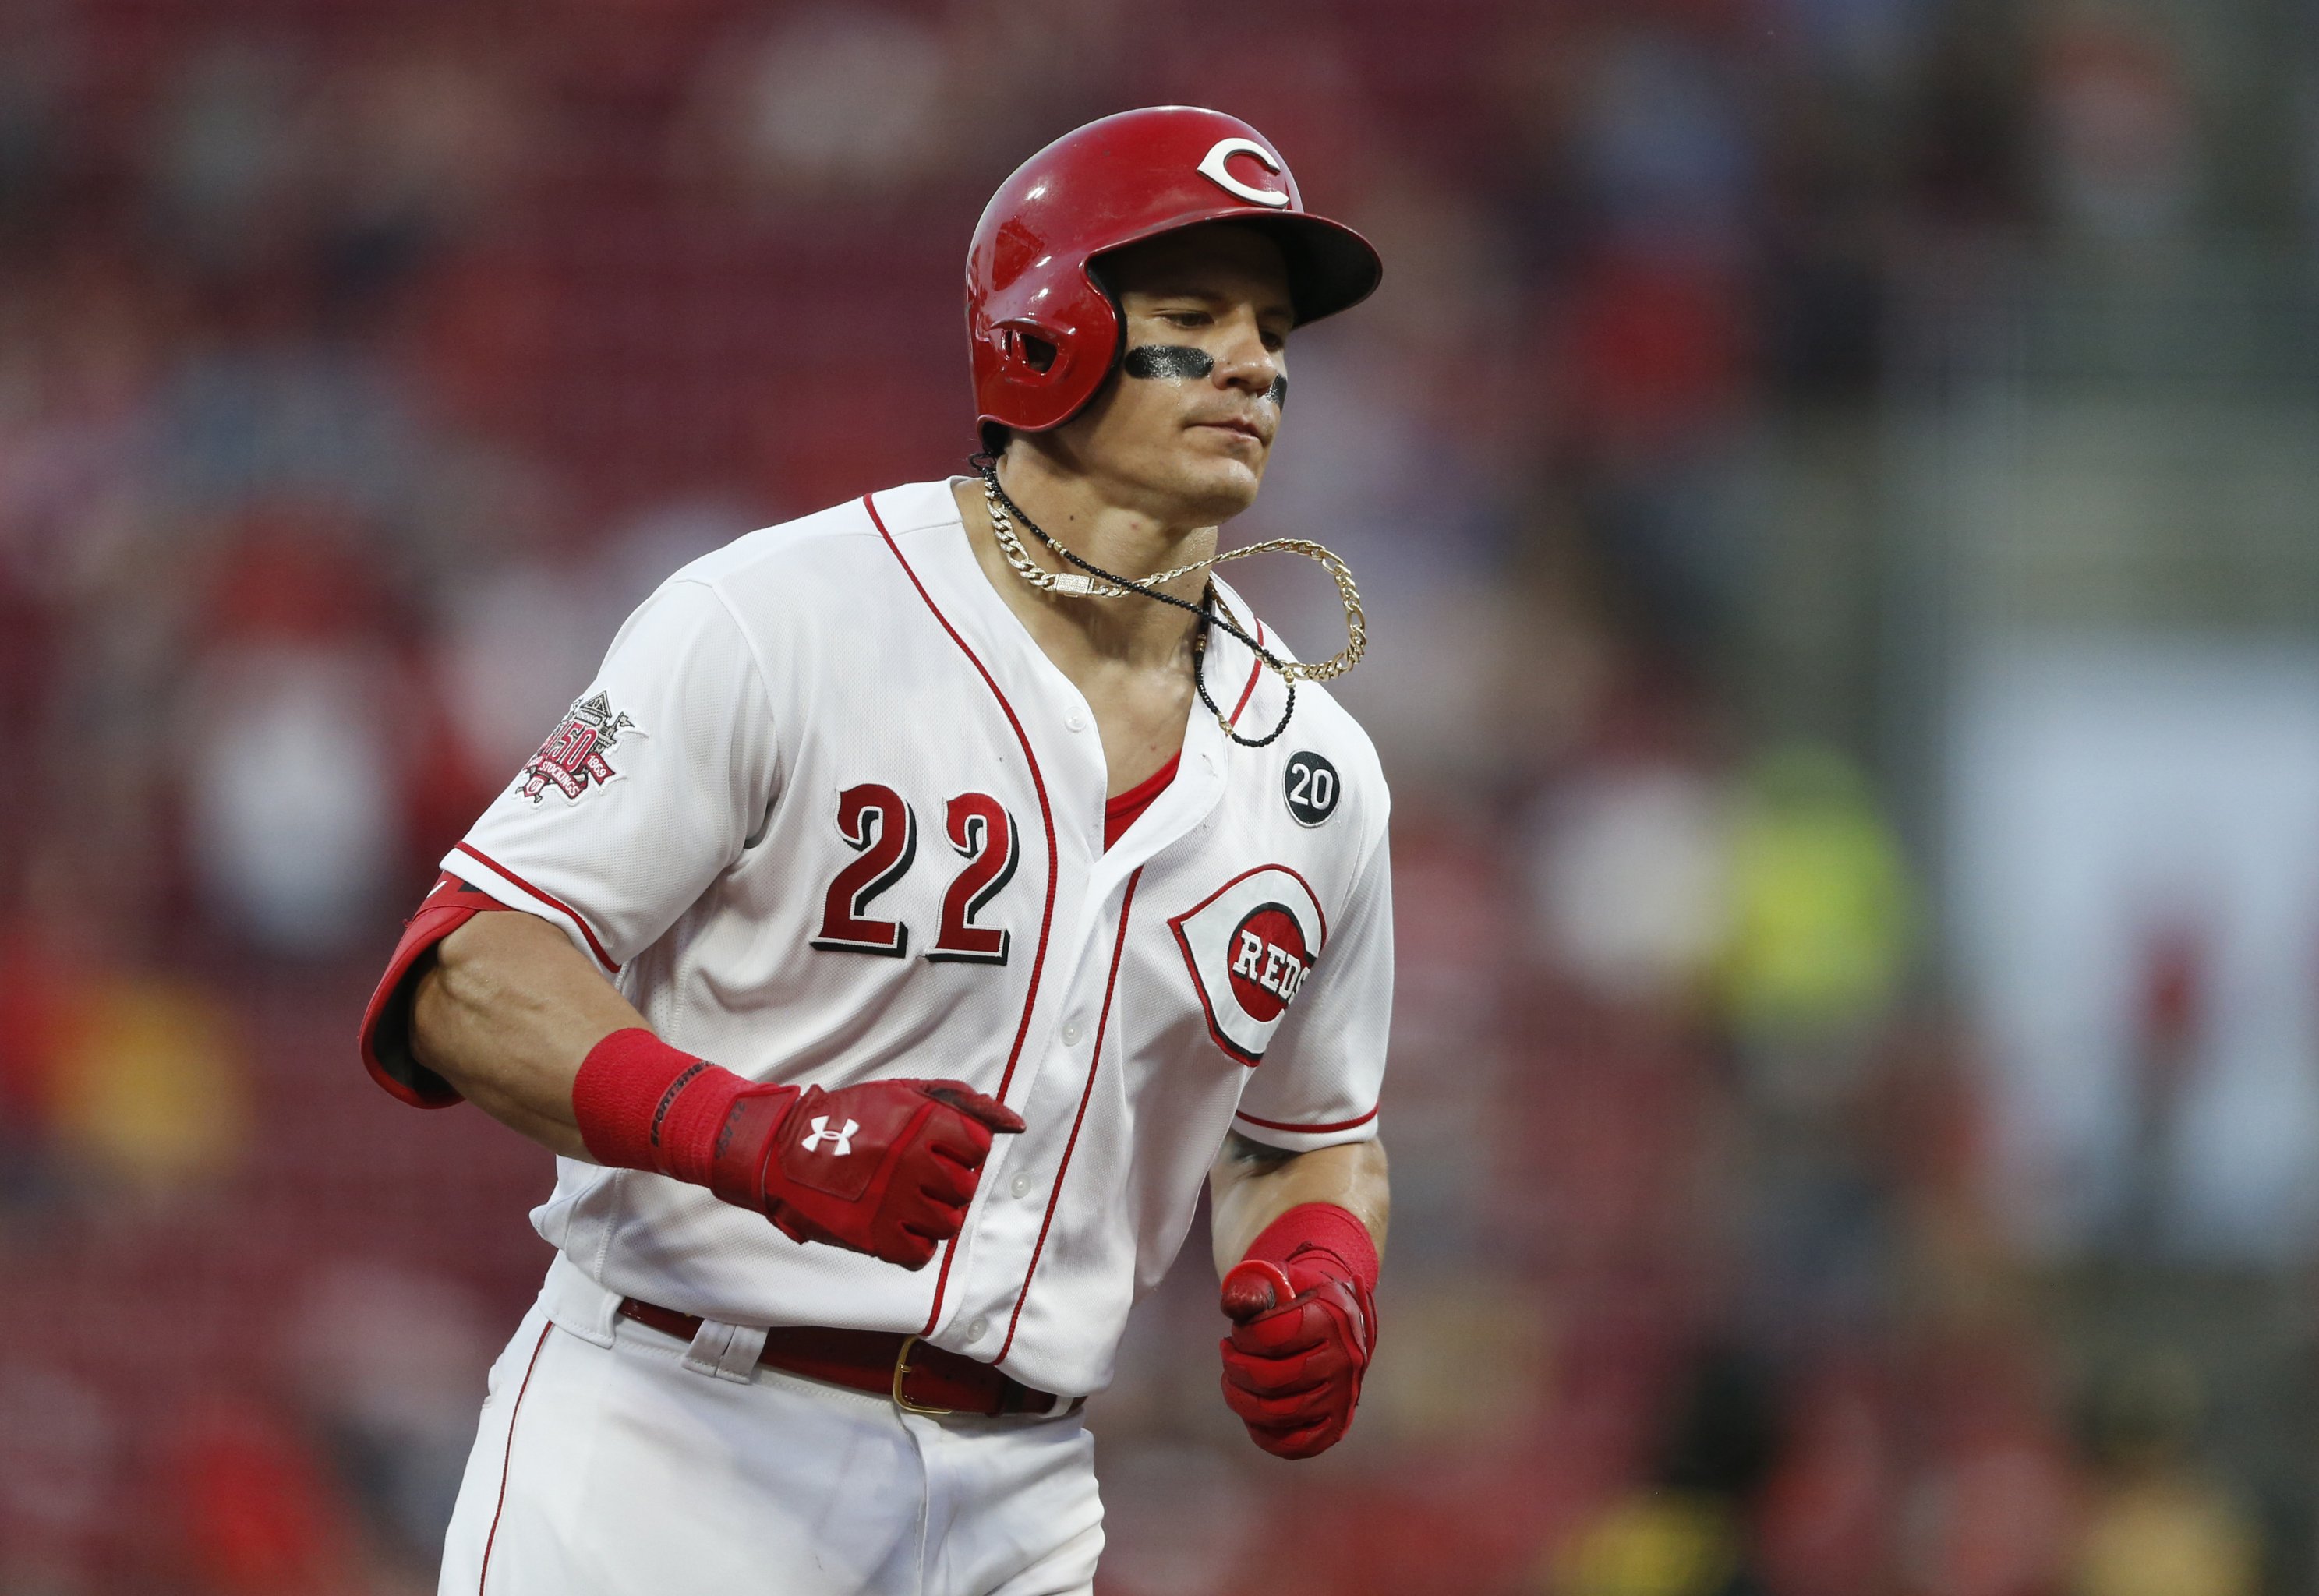 Derek Dietrich's Rise From 29-Year-Old Spare Part to MLB's King of